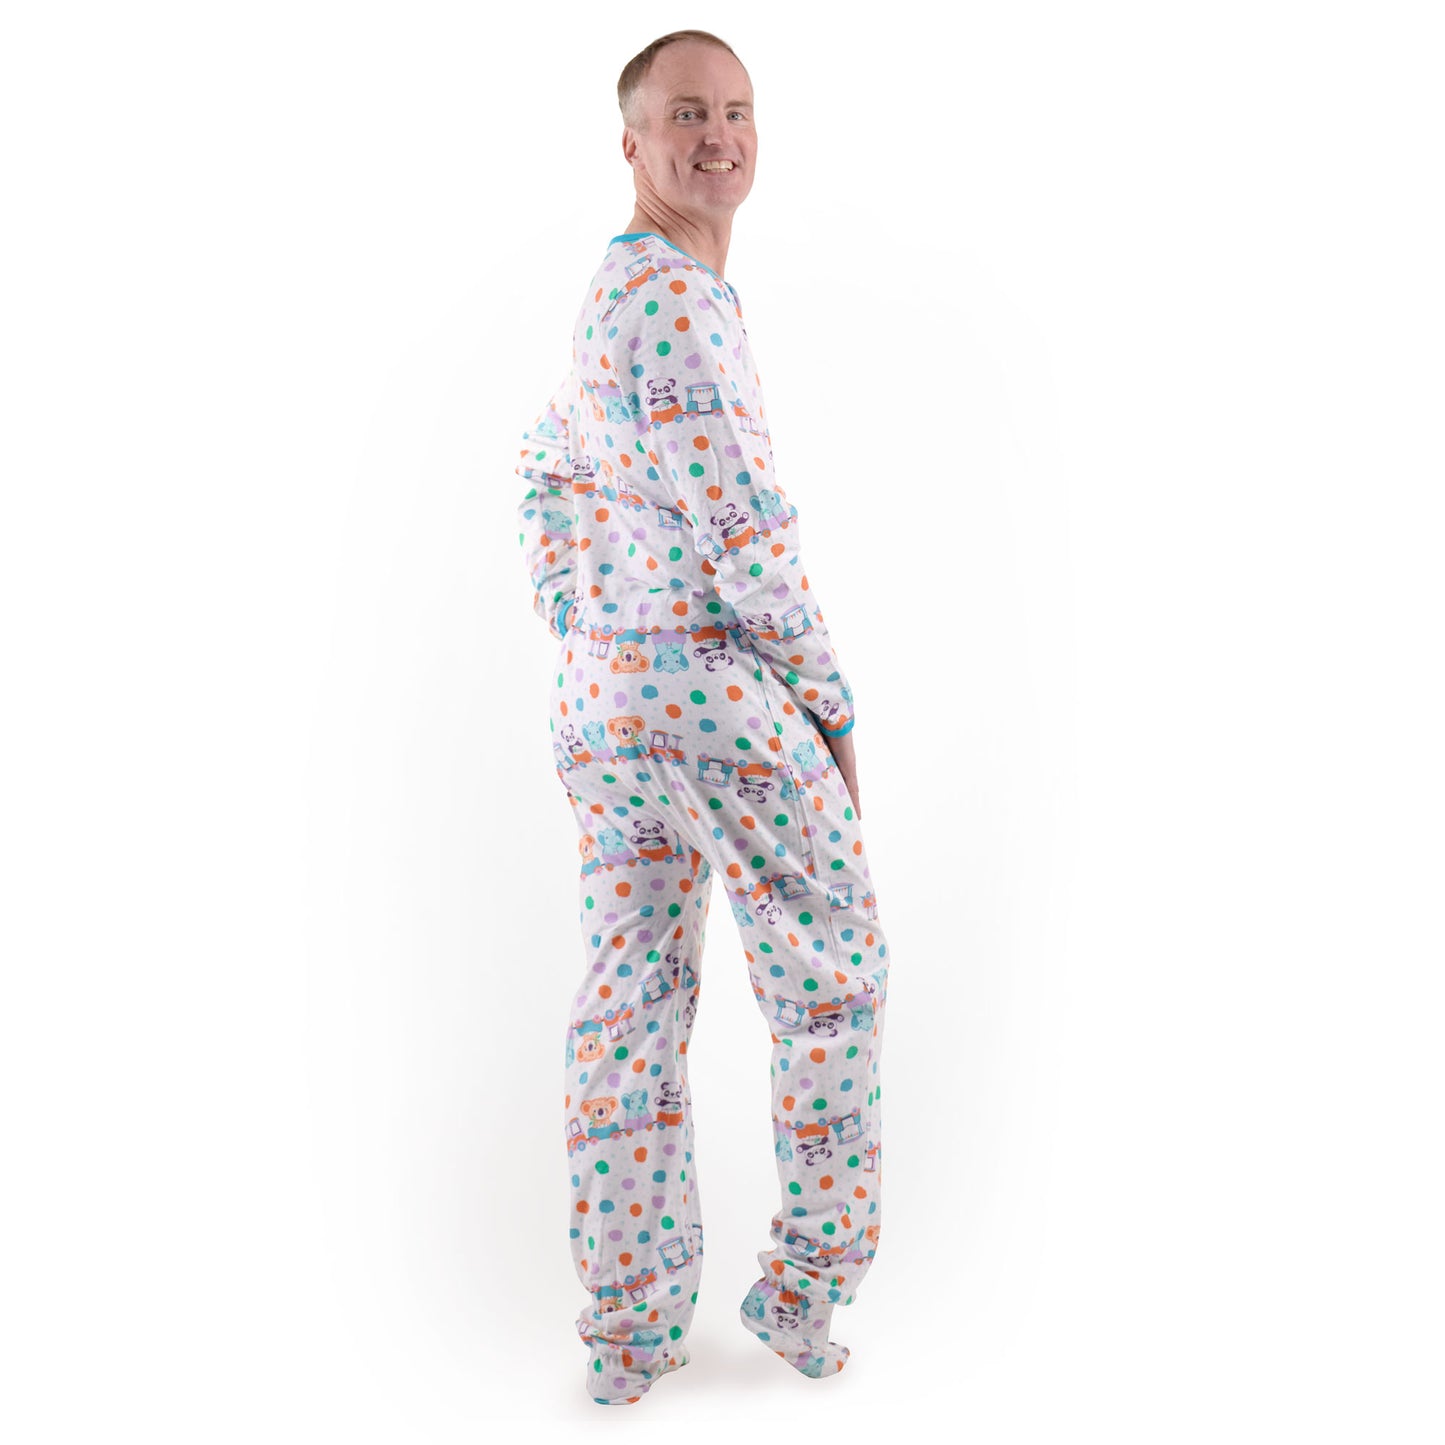 Rearz - Footed Jammies - Critter Caboose